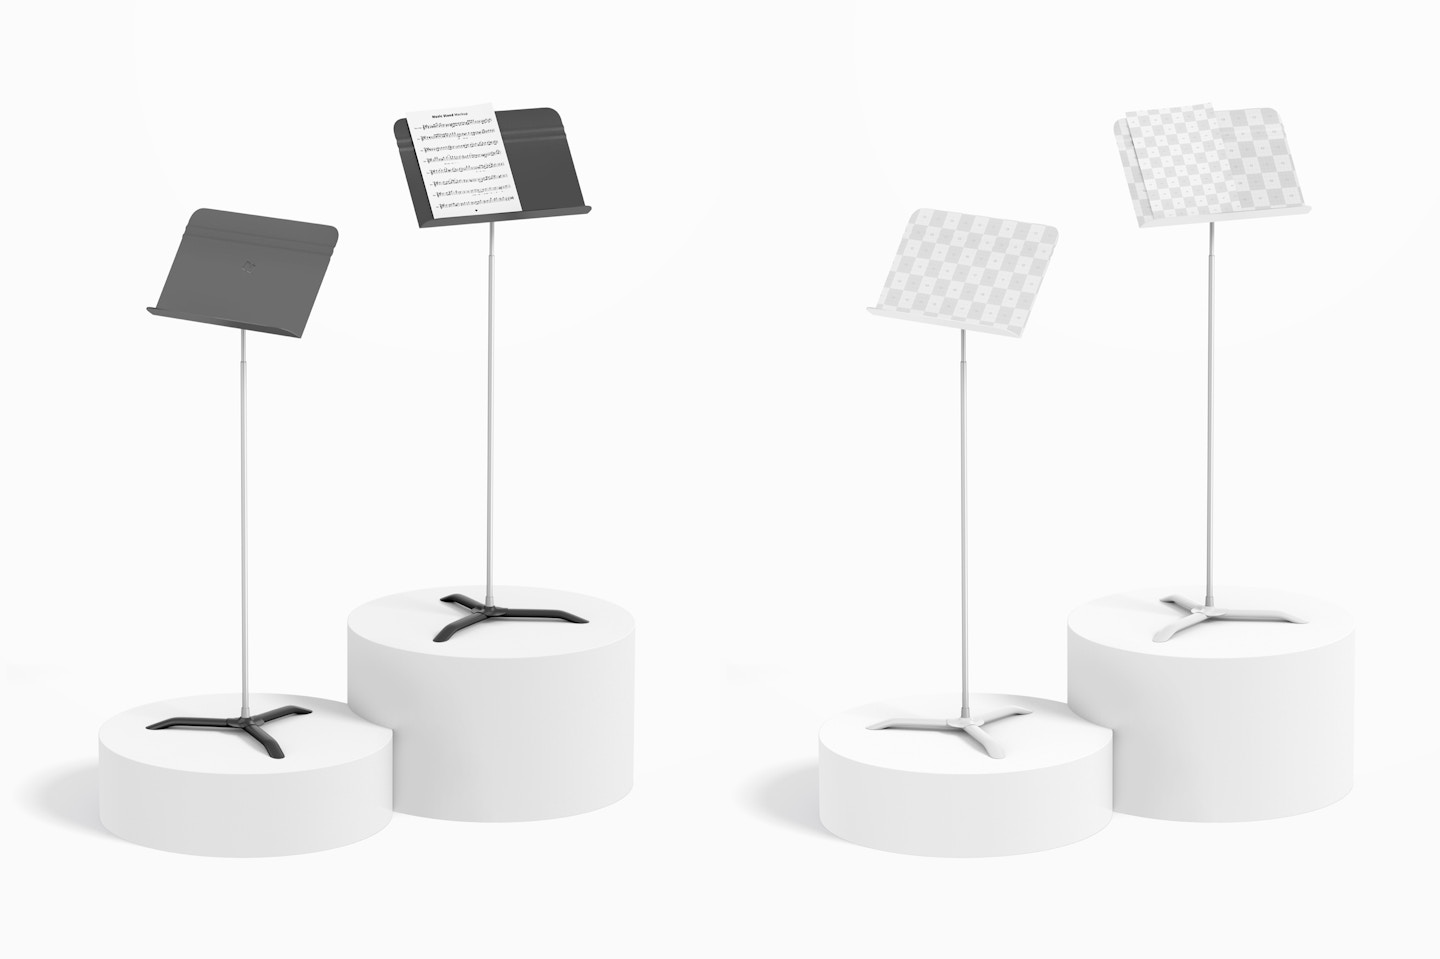 Music Stands Mockup